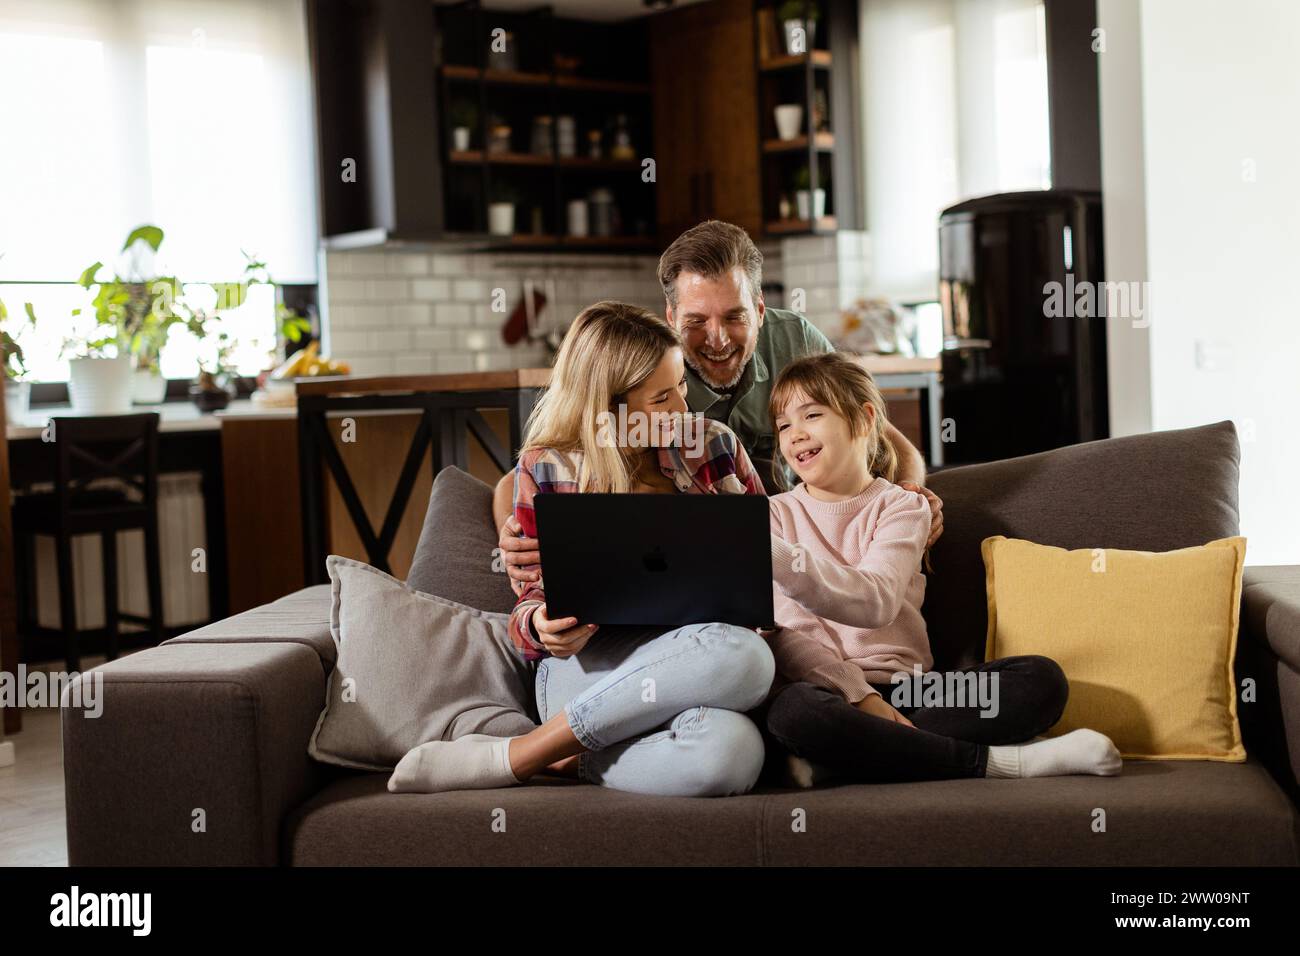 Joyful family of three spends quality time together on the living room sofa, sharing a moment around a laptop in their comfortable home Stock Photo